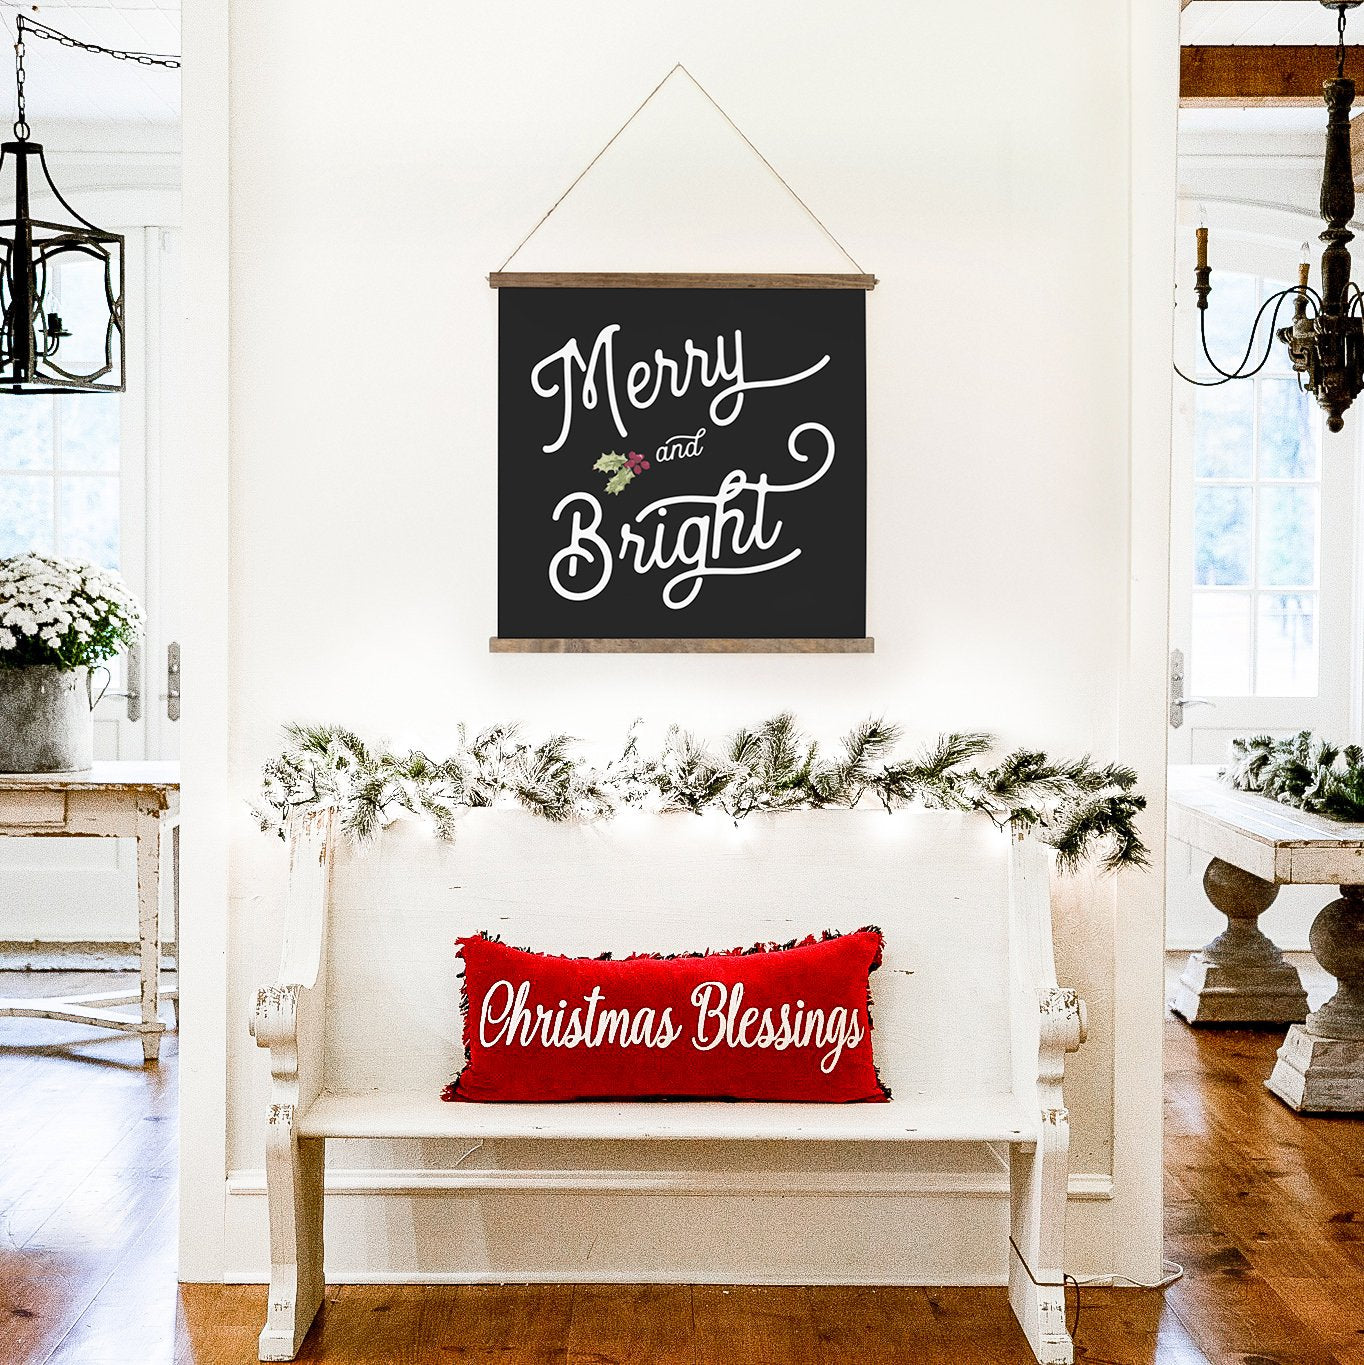 Smallwoods canvas sign, with "Merry and Bright" printed in white on black canvas with a mistletoe.